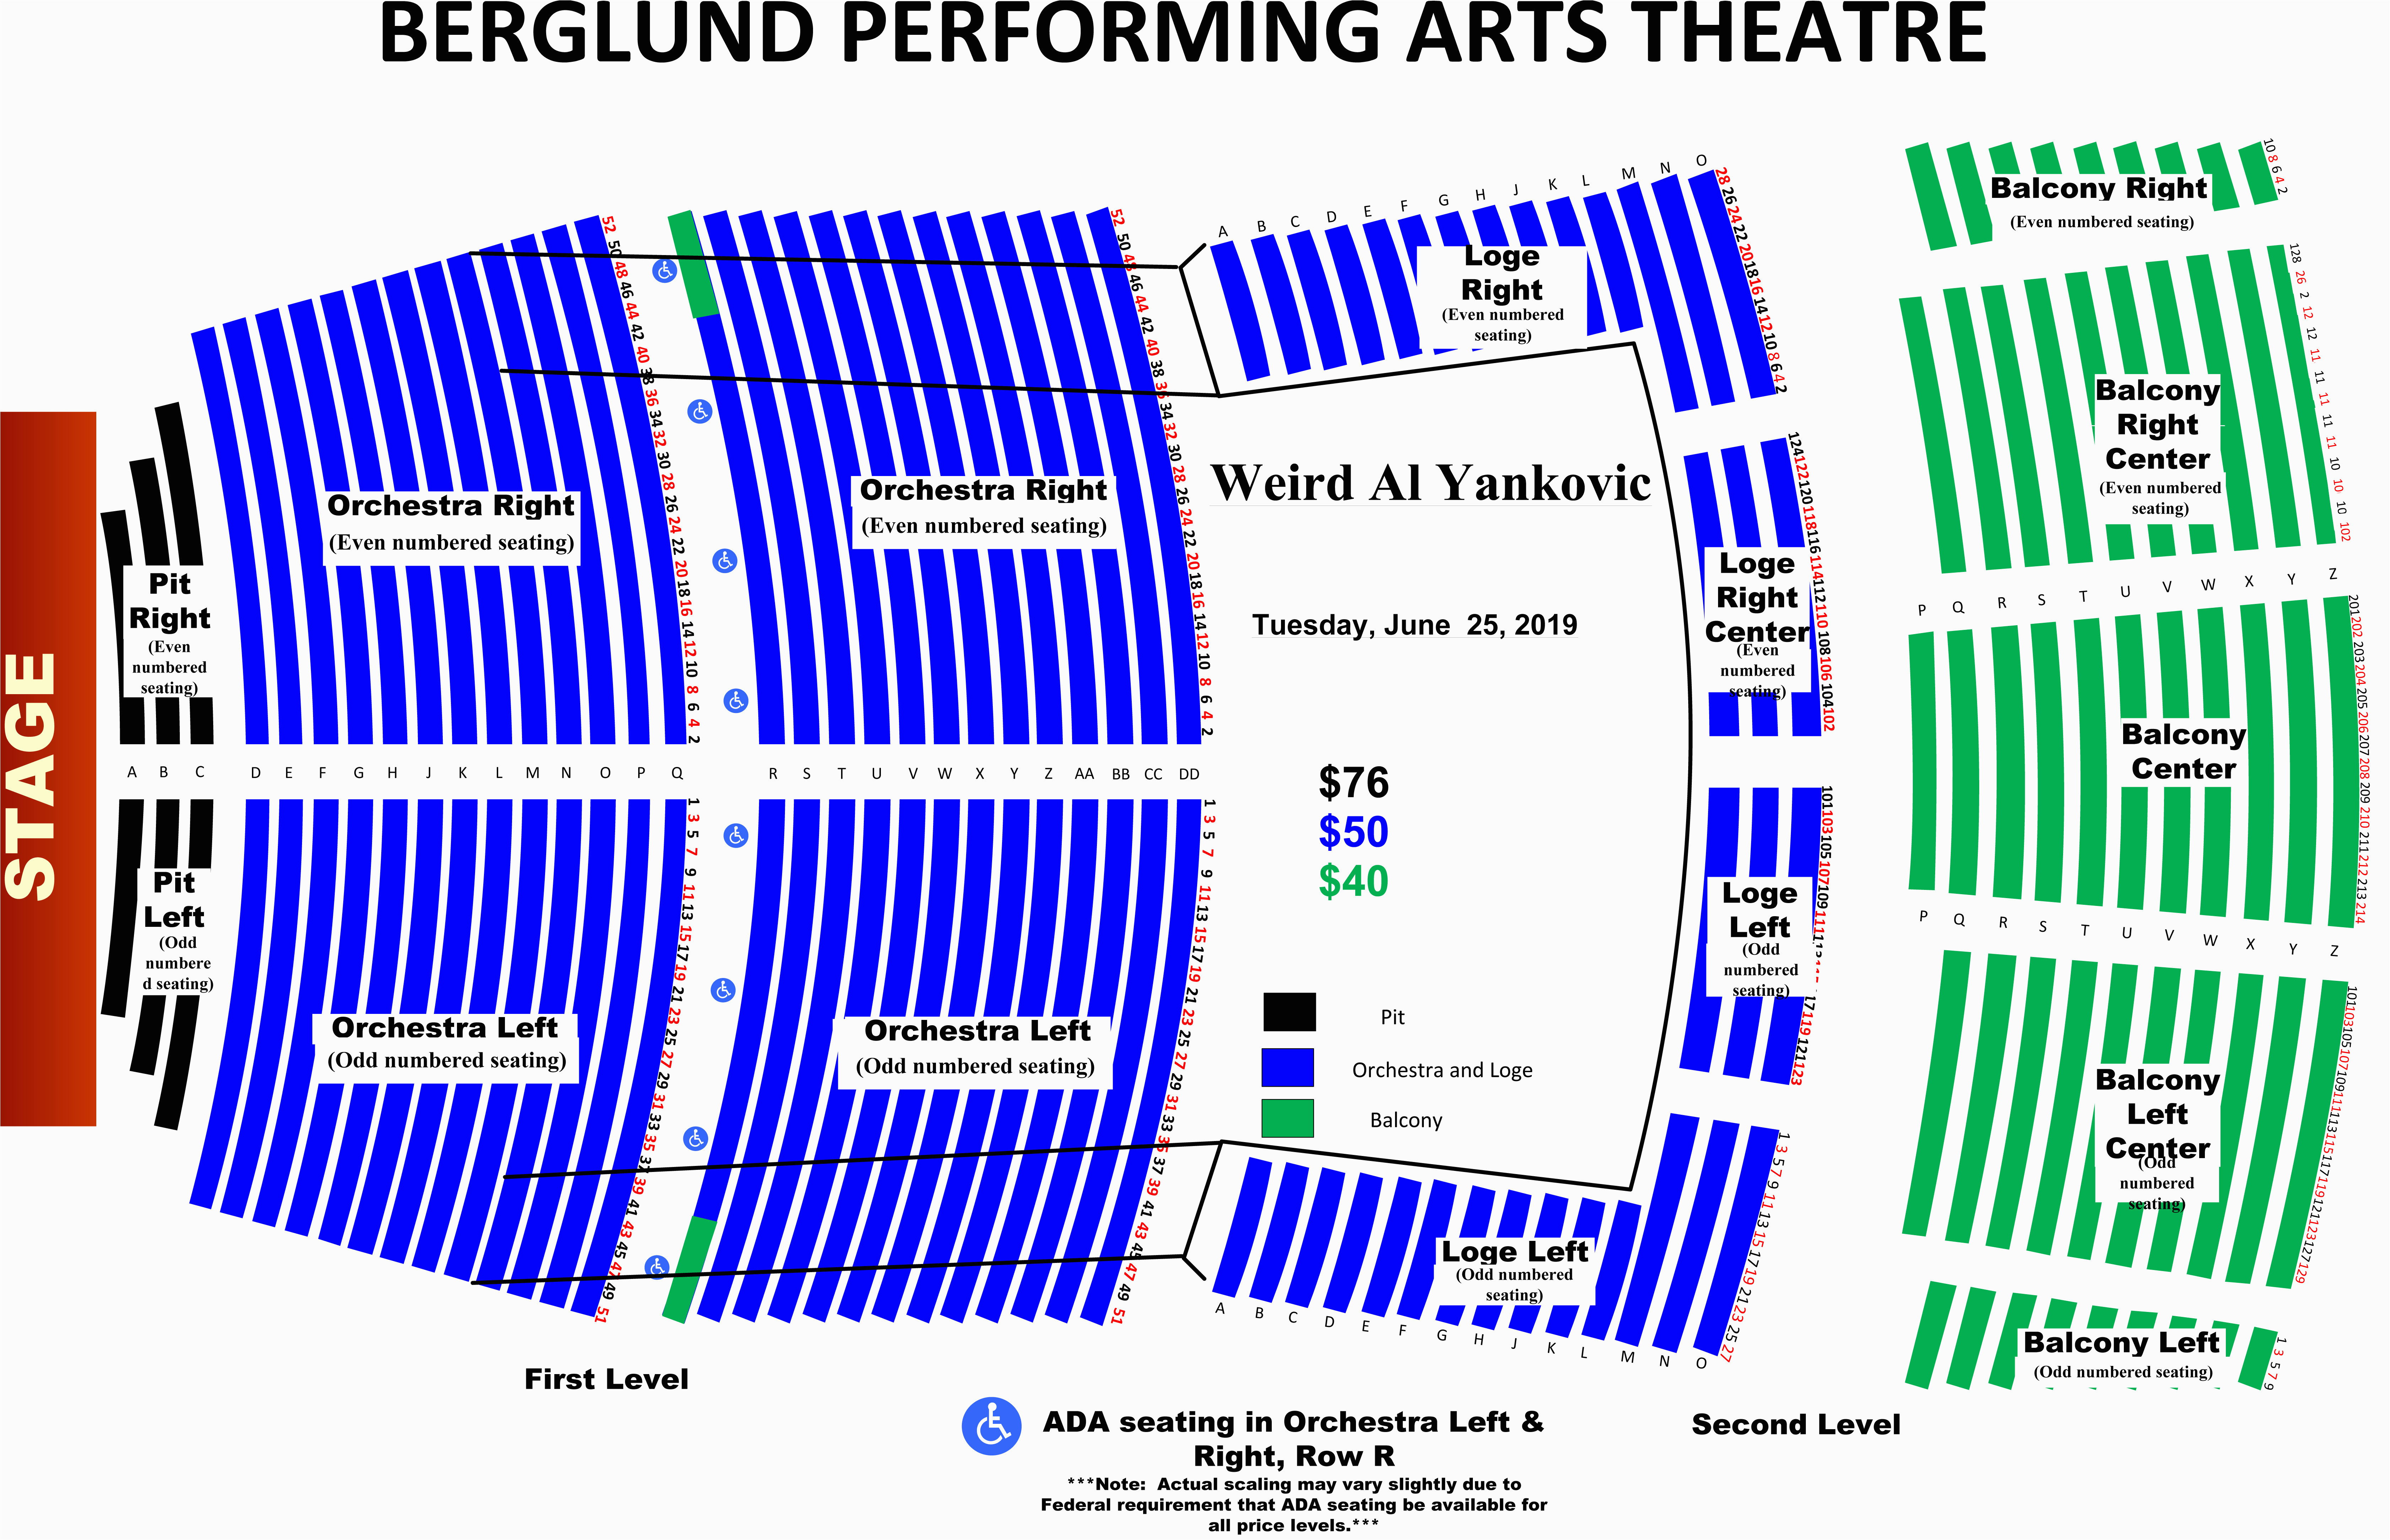 Avalon Theater Seating Chart - The Avalon Theatre At Niagara Fallsview Casi...